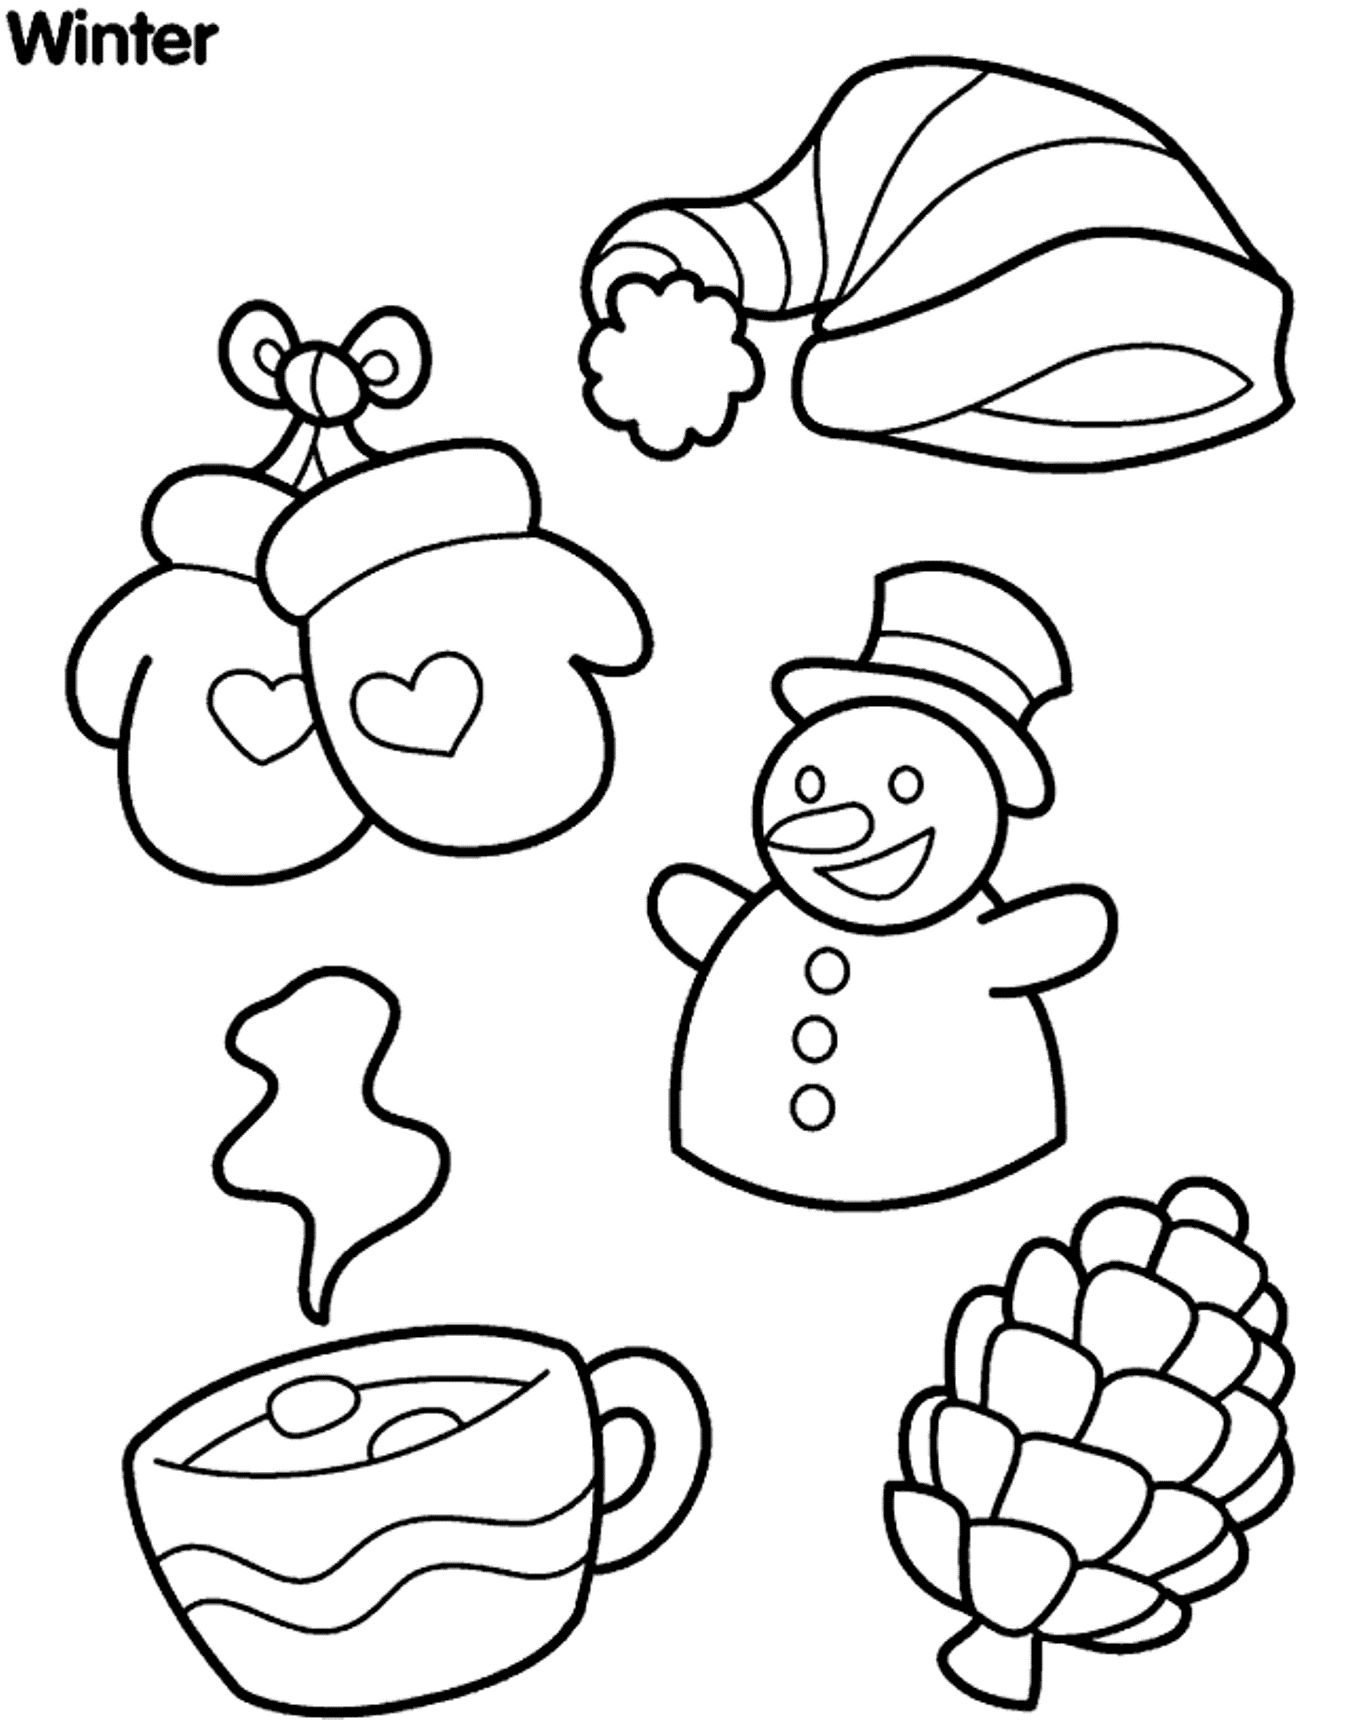 A Must Stuff Winter Clothes Coloring Pages | Winter Coloring pages ...